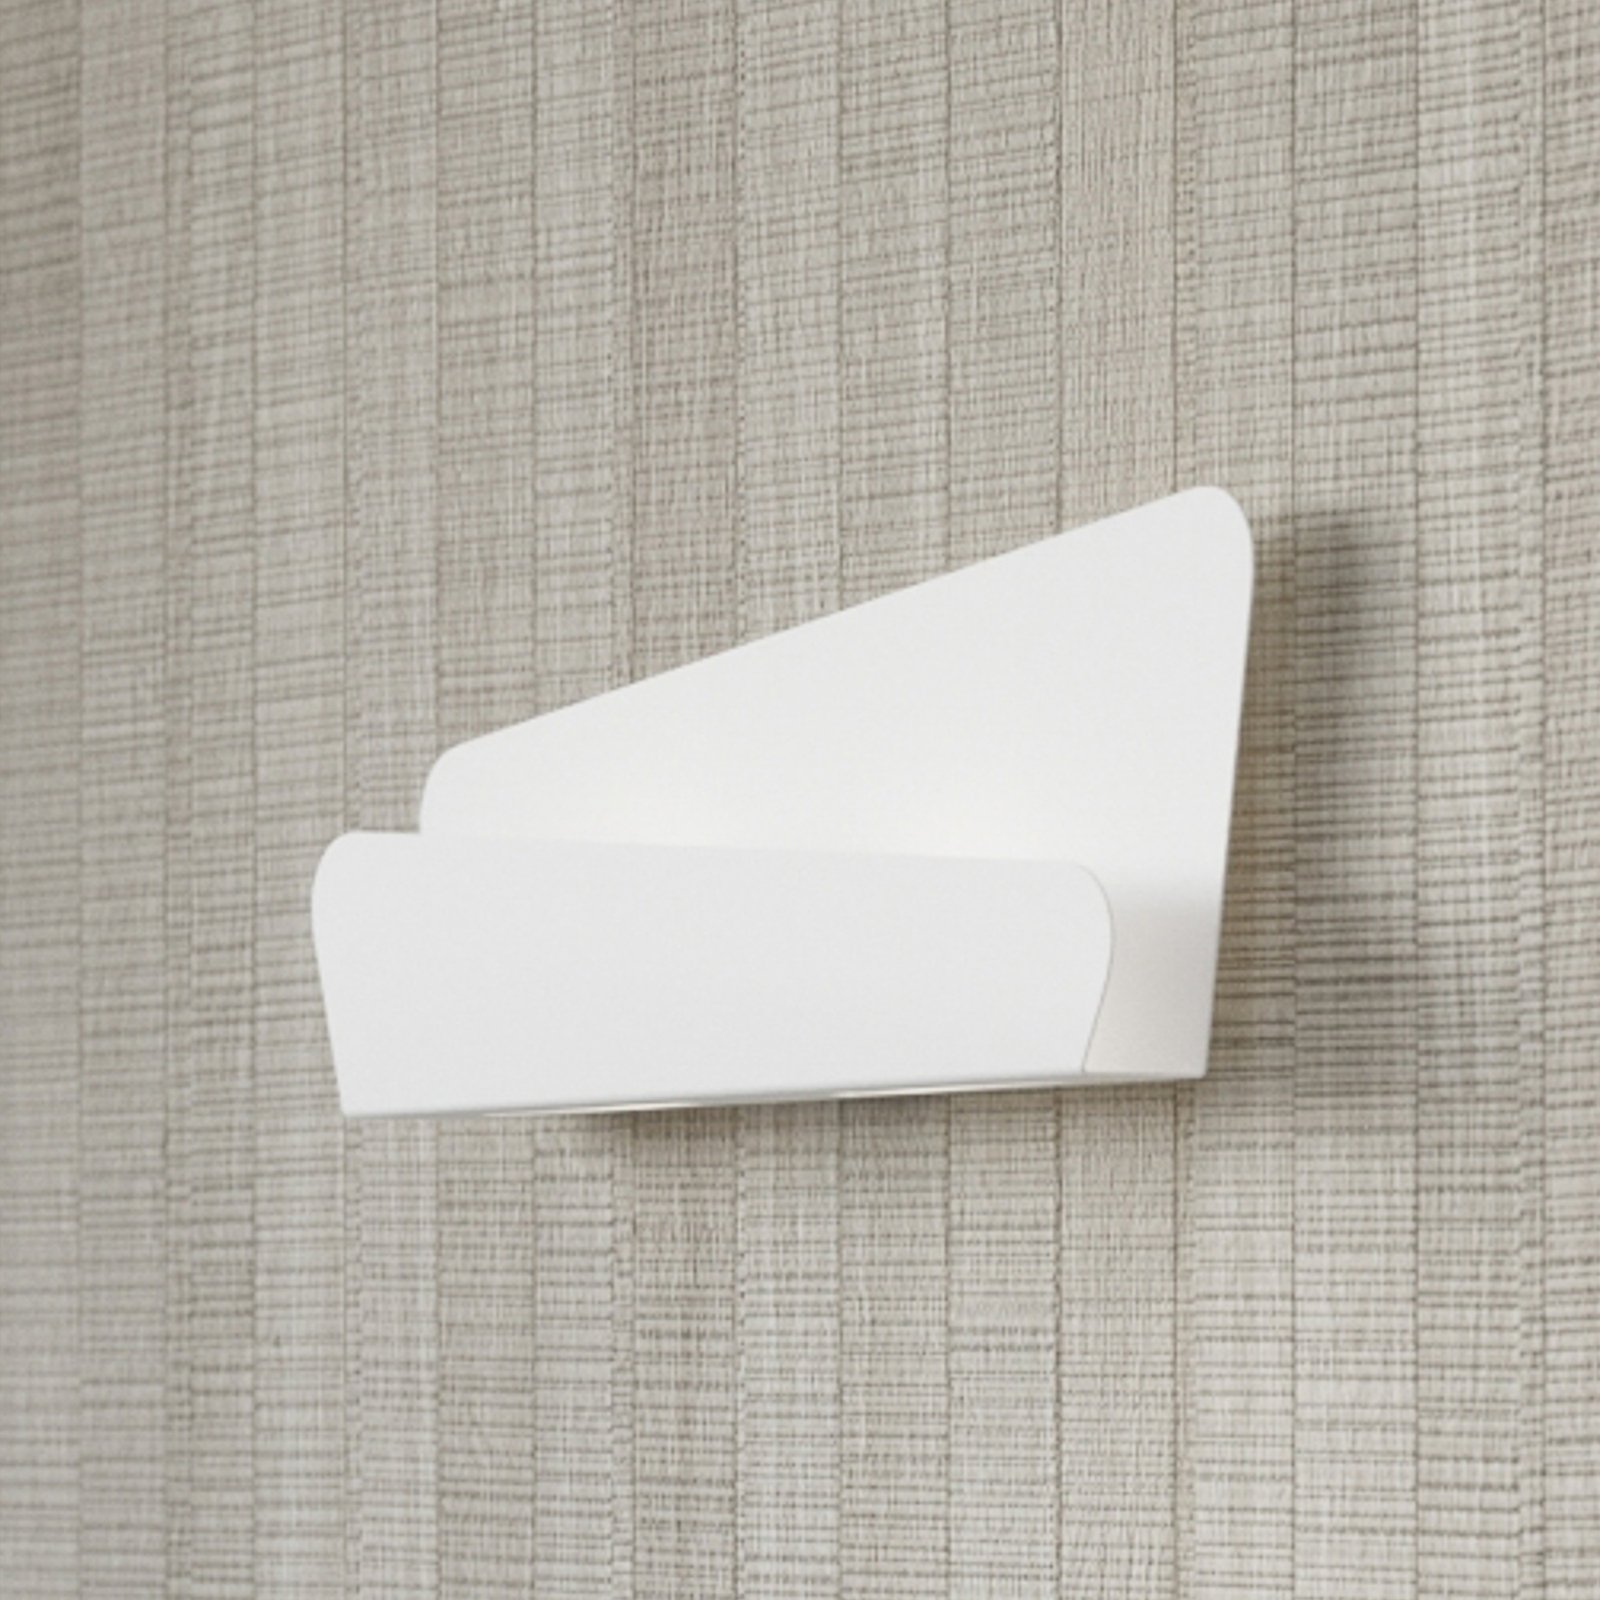 Euluna Seraphine wall light with white shade